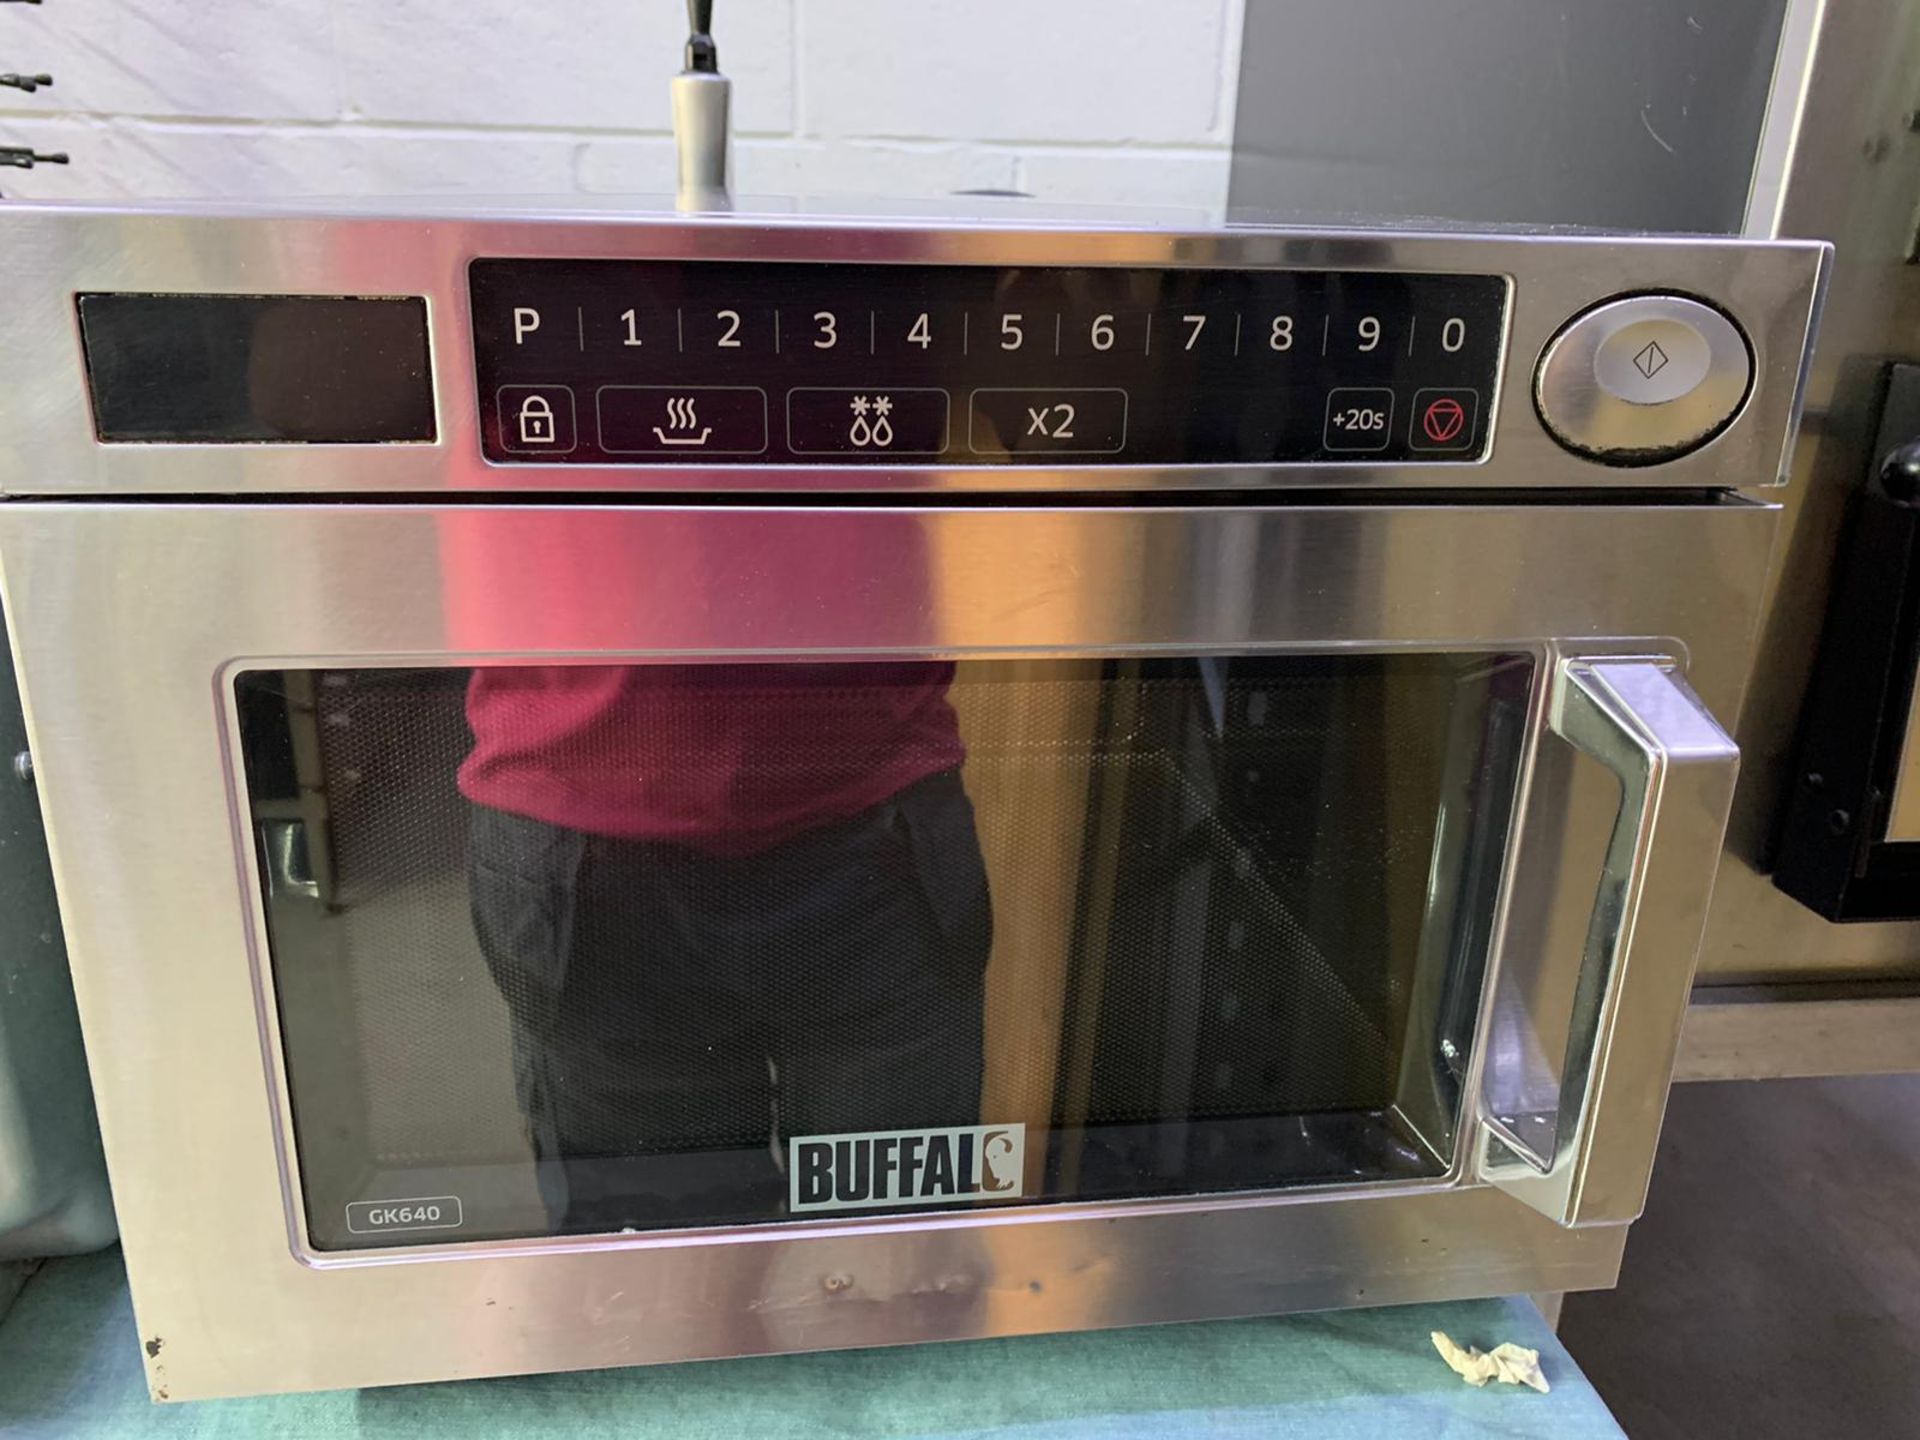 Buffalo Programmable Commercial Microwave Oven 1850W GK640 Power output: 1850 watts. 13A.